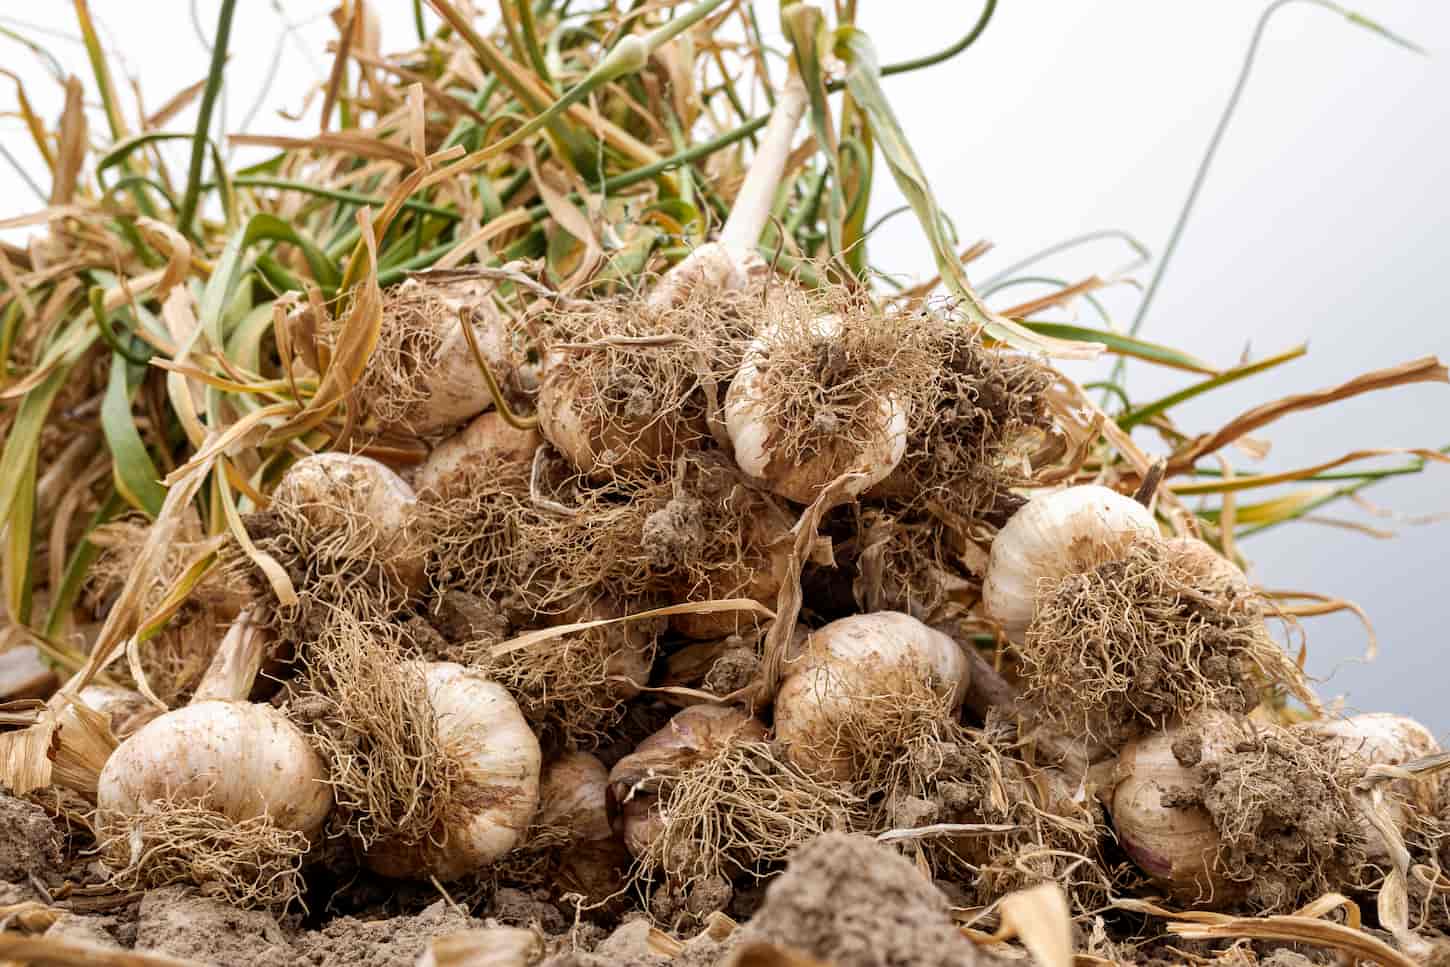 An image of bunches of garlic recently harvested in the crops.